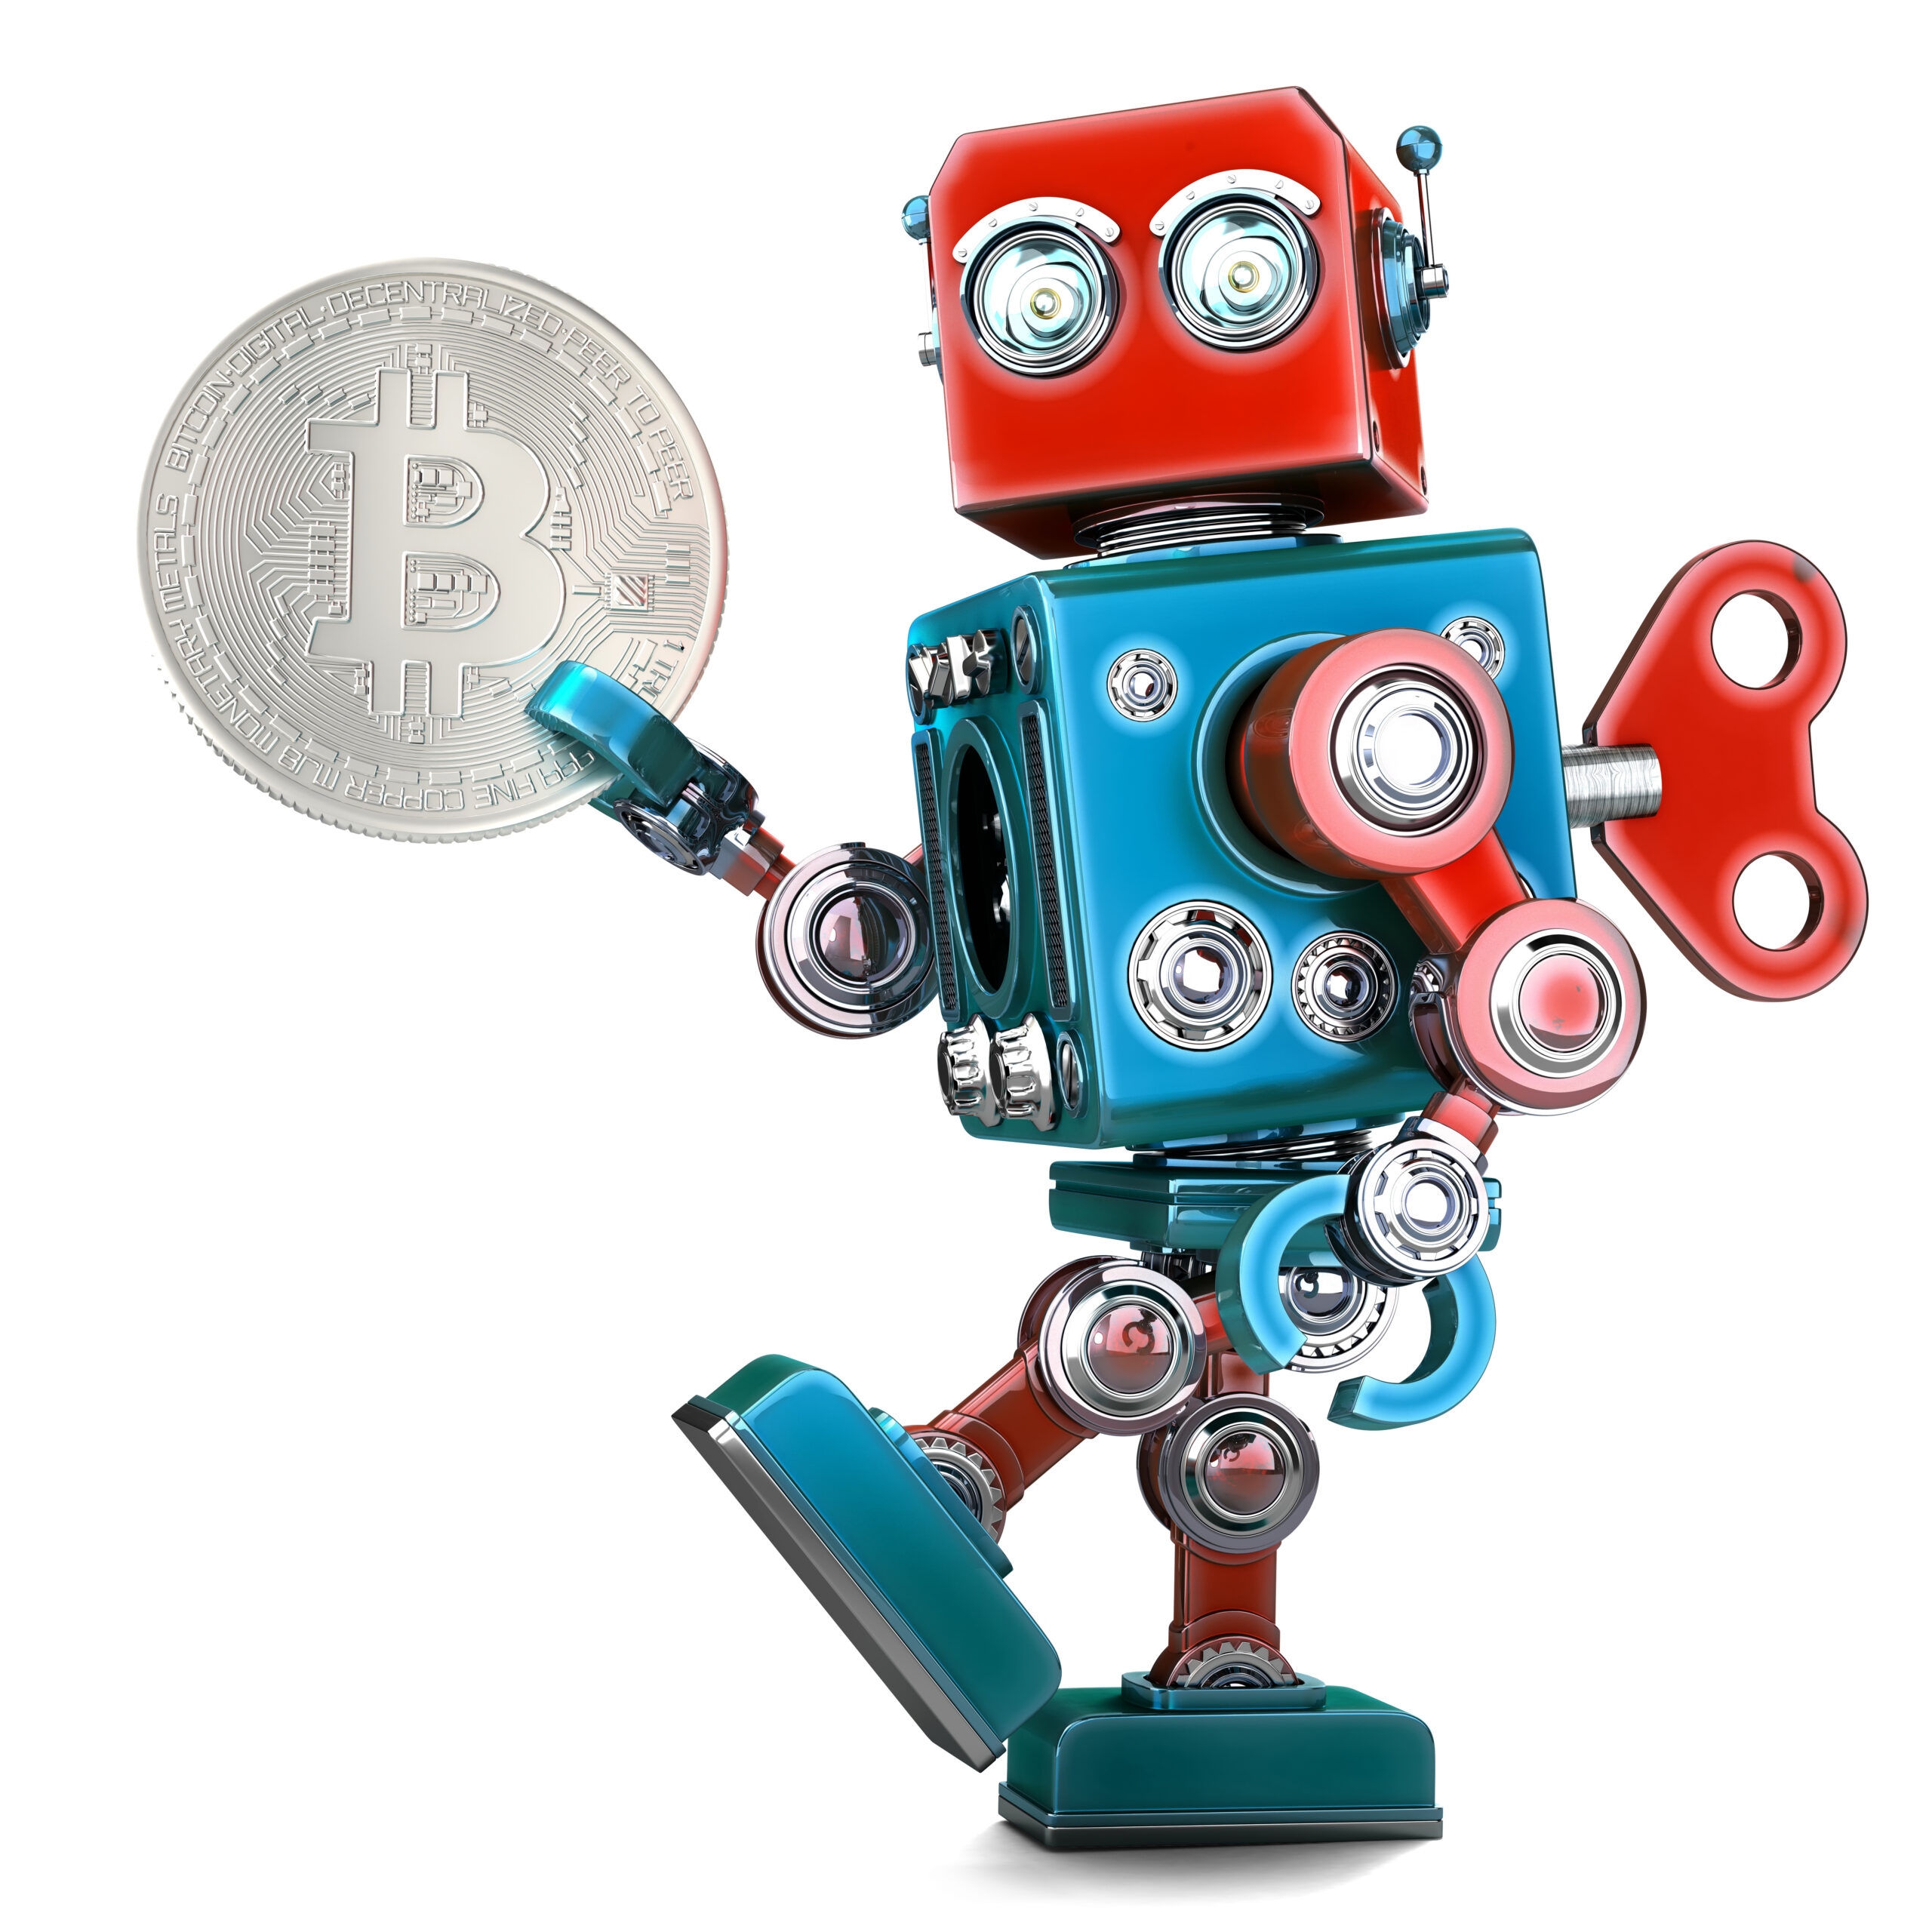 Retro Robot holding bitcoin coin. 3D illustration. Isolated. Contains clipping path.